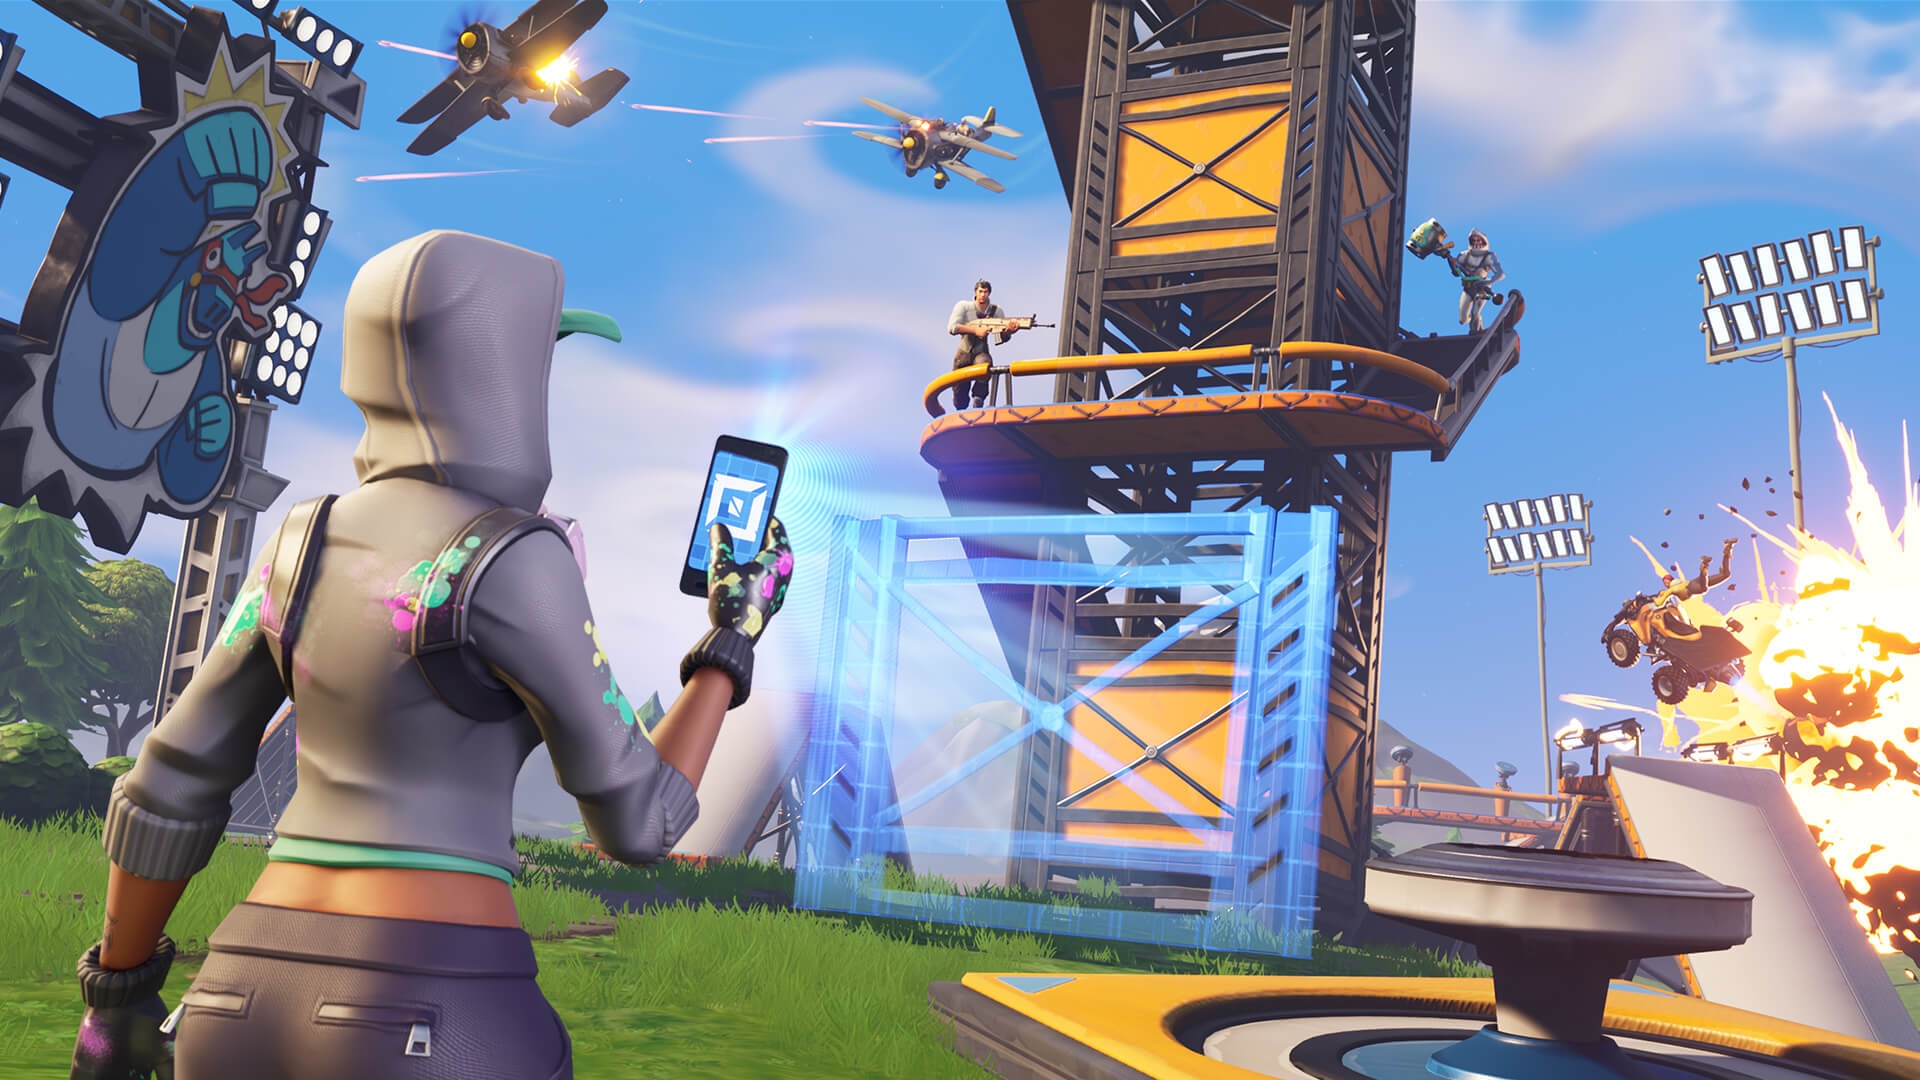 You may be enjoying a game on the PC while your friends are on Xbox, but you can still enjoy the game together with this how to link Fortnite accounts guide.